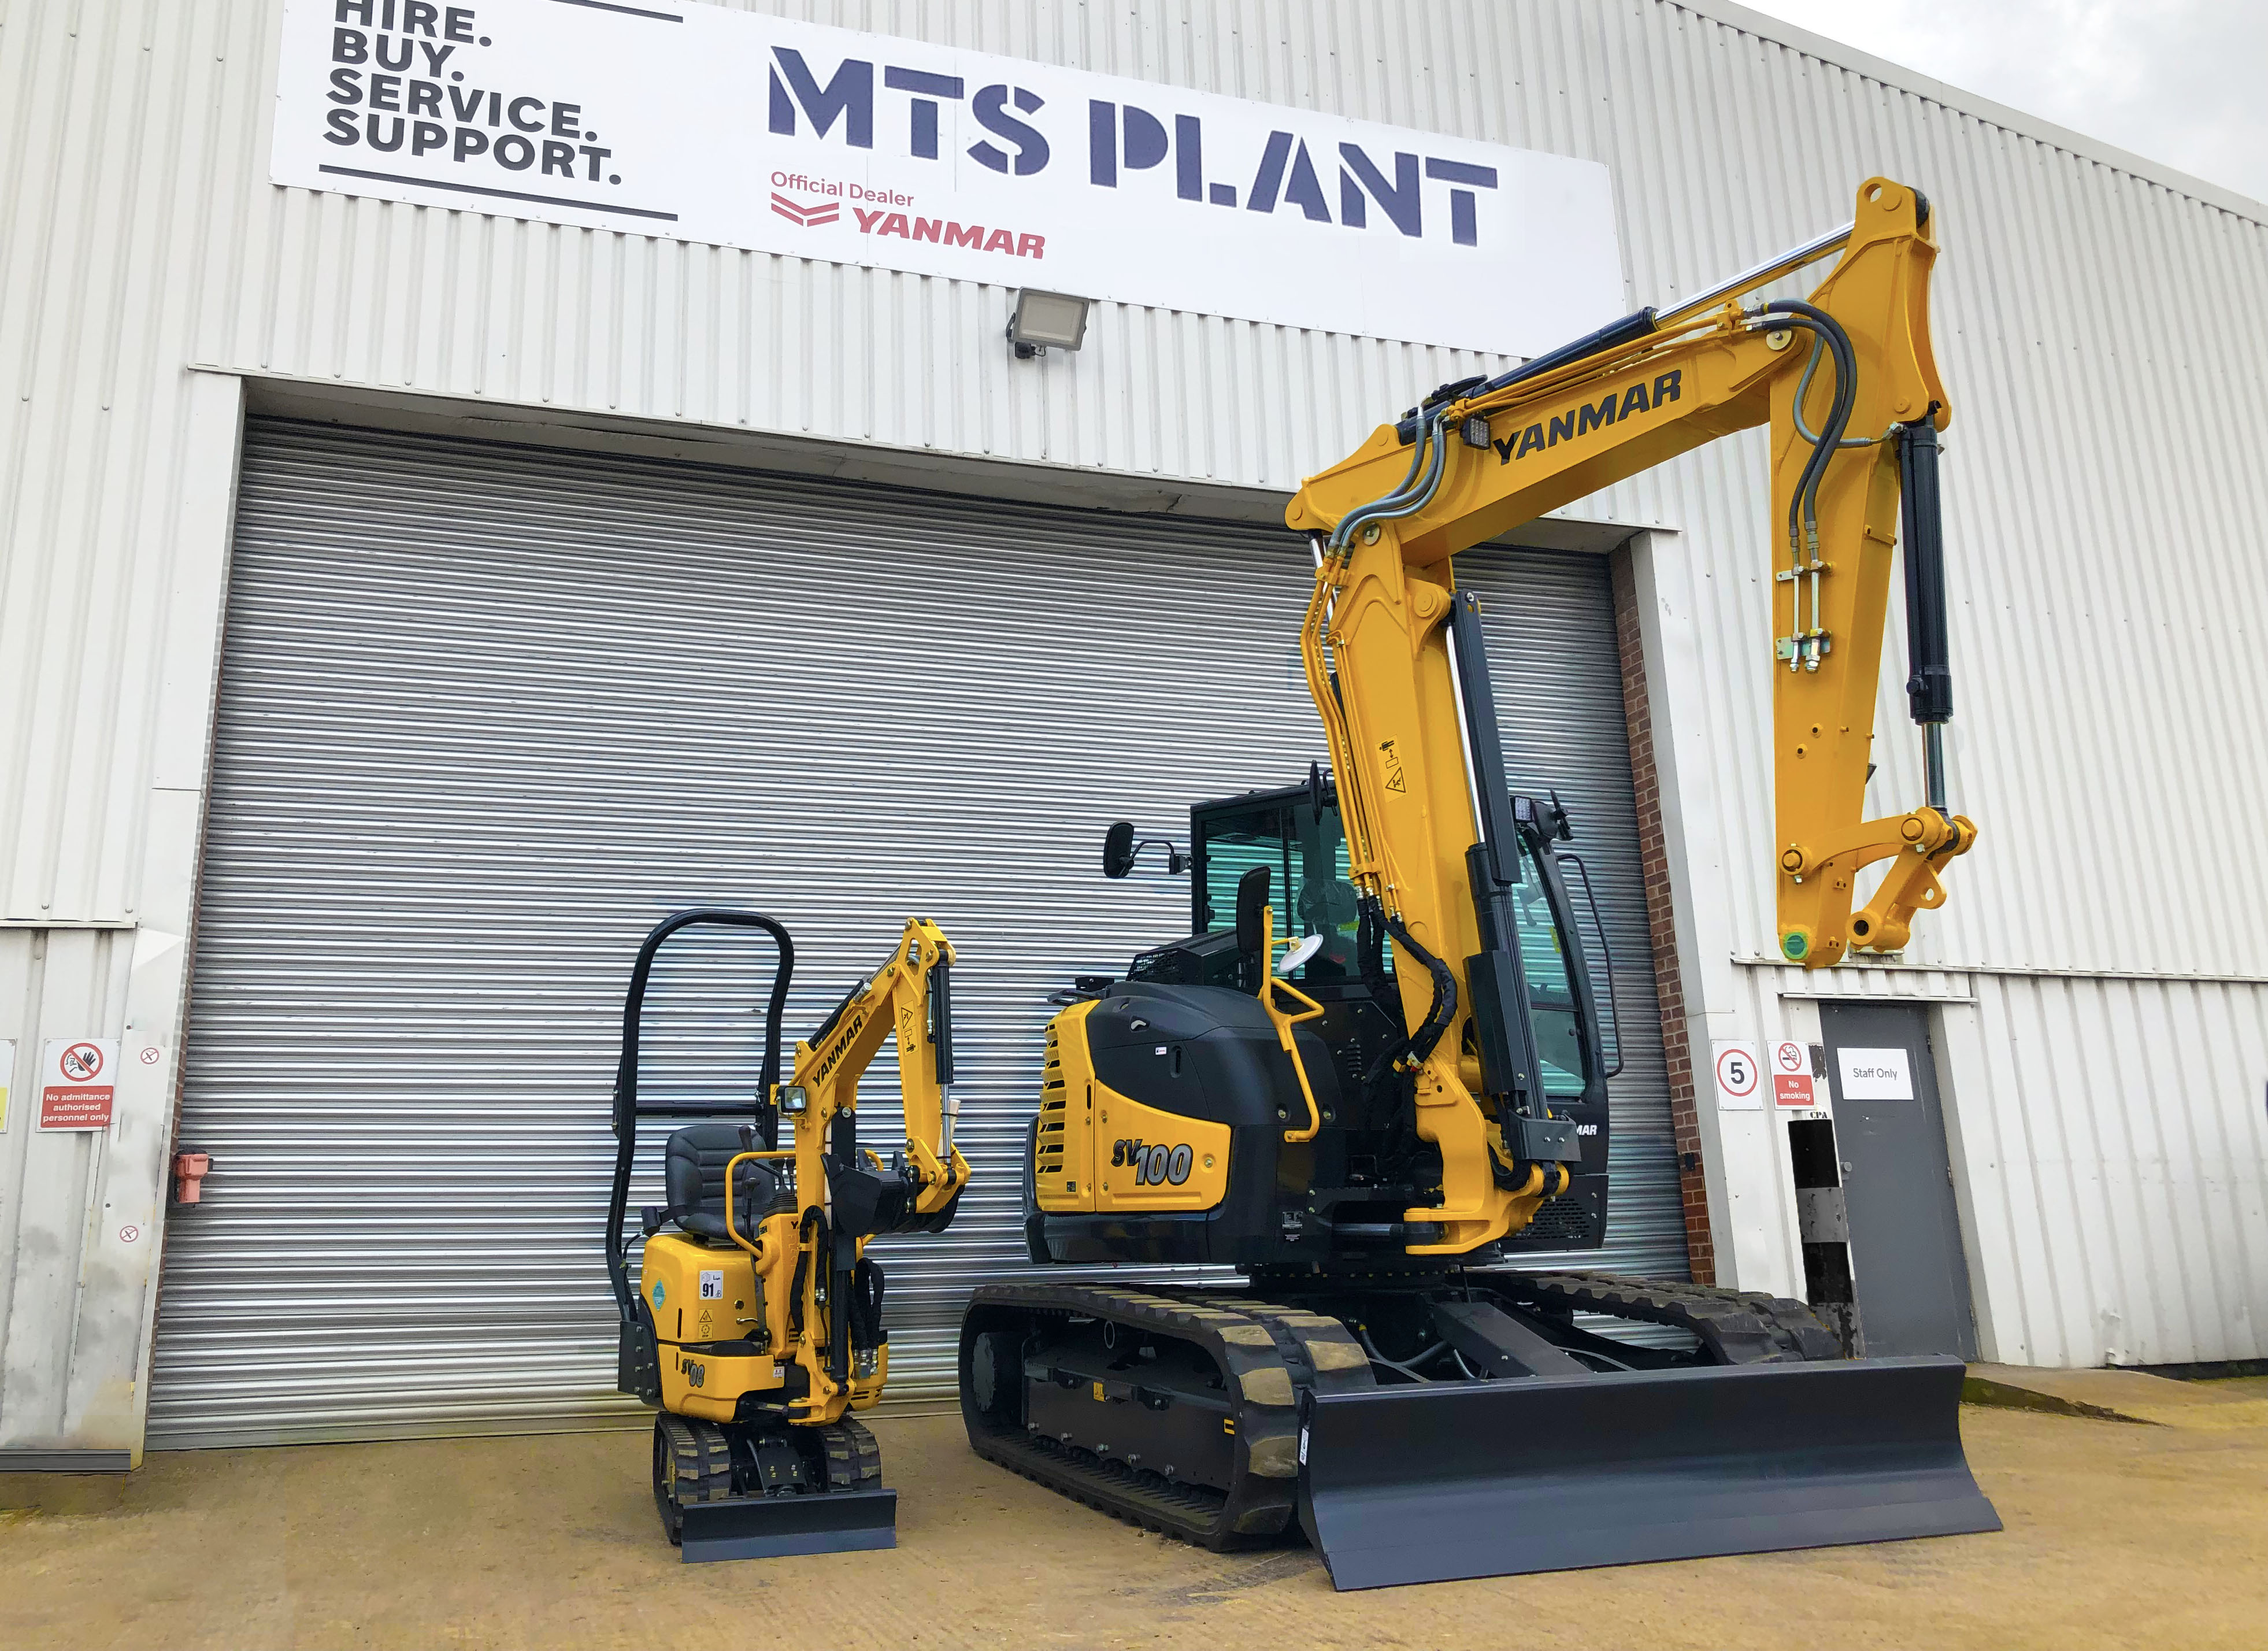 MTS Plant expands Yanmar territory to southern Scotland